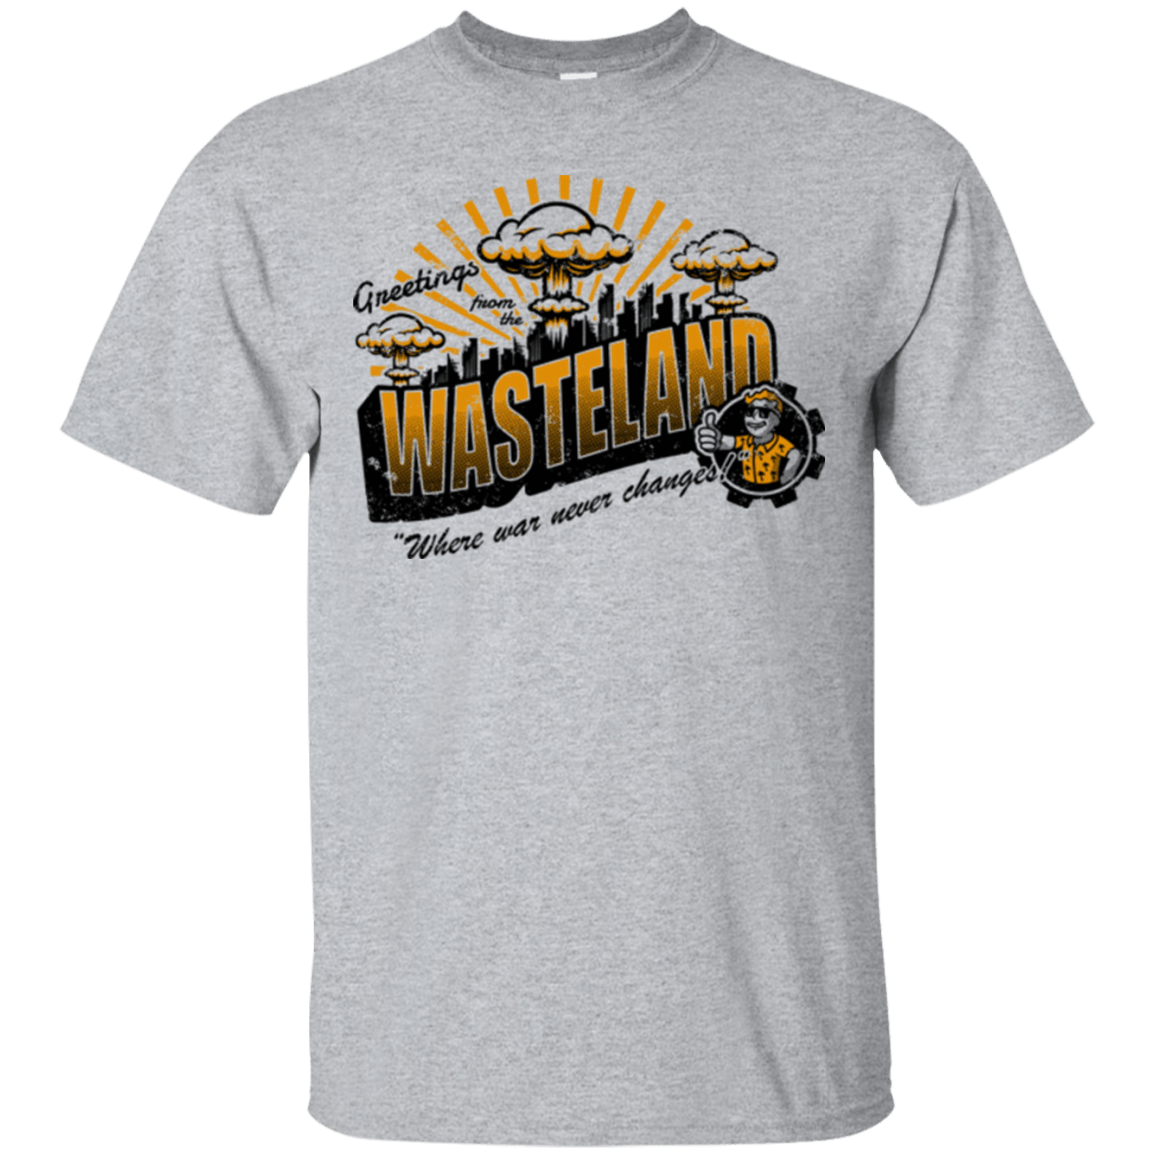 T-Shirts Sport Grey / Small Greetings from the Wasteland! T-Shirt